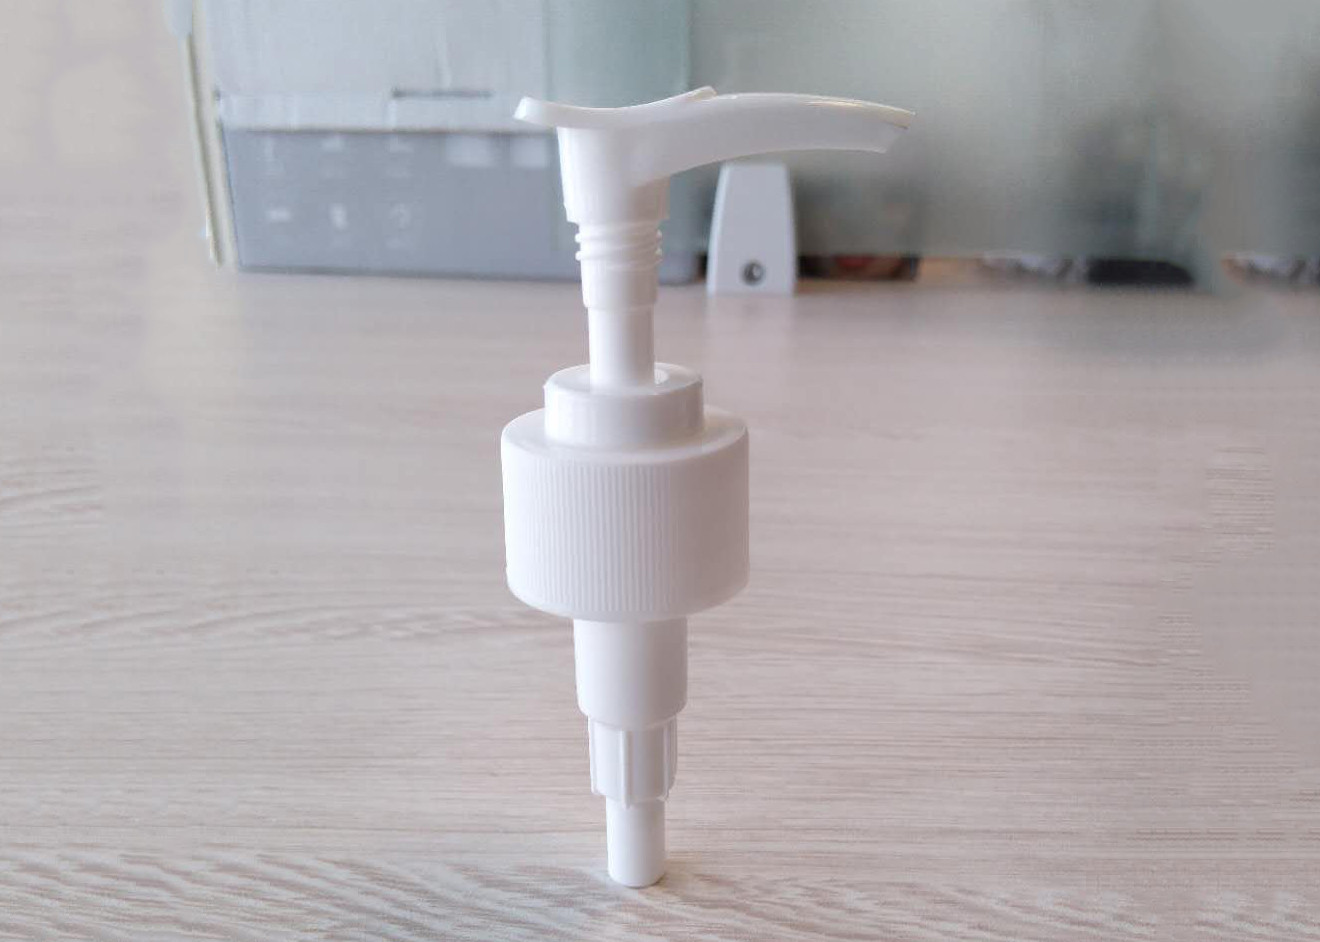 Up - Down ribbed Plastic 24mm Screw Lotion Pump